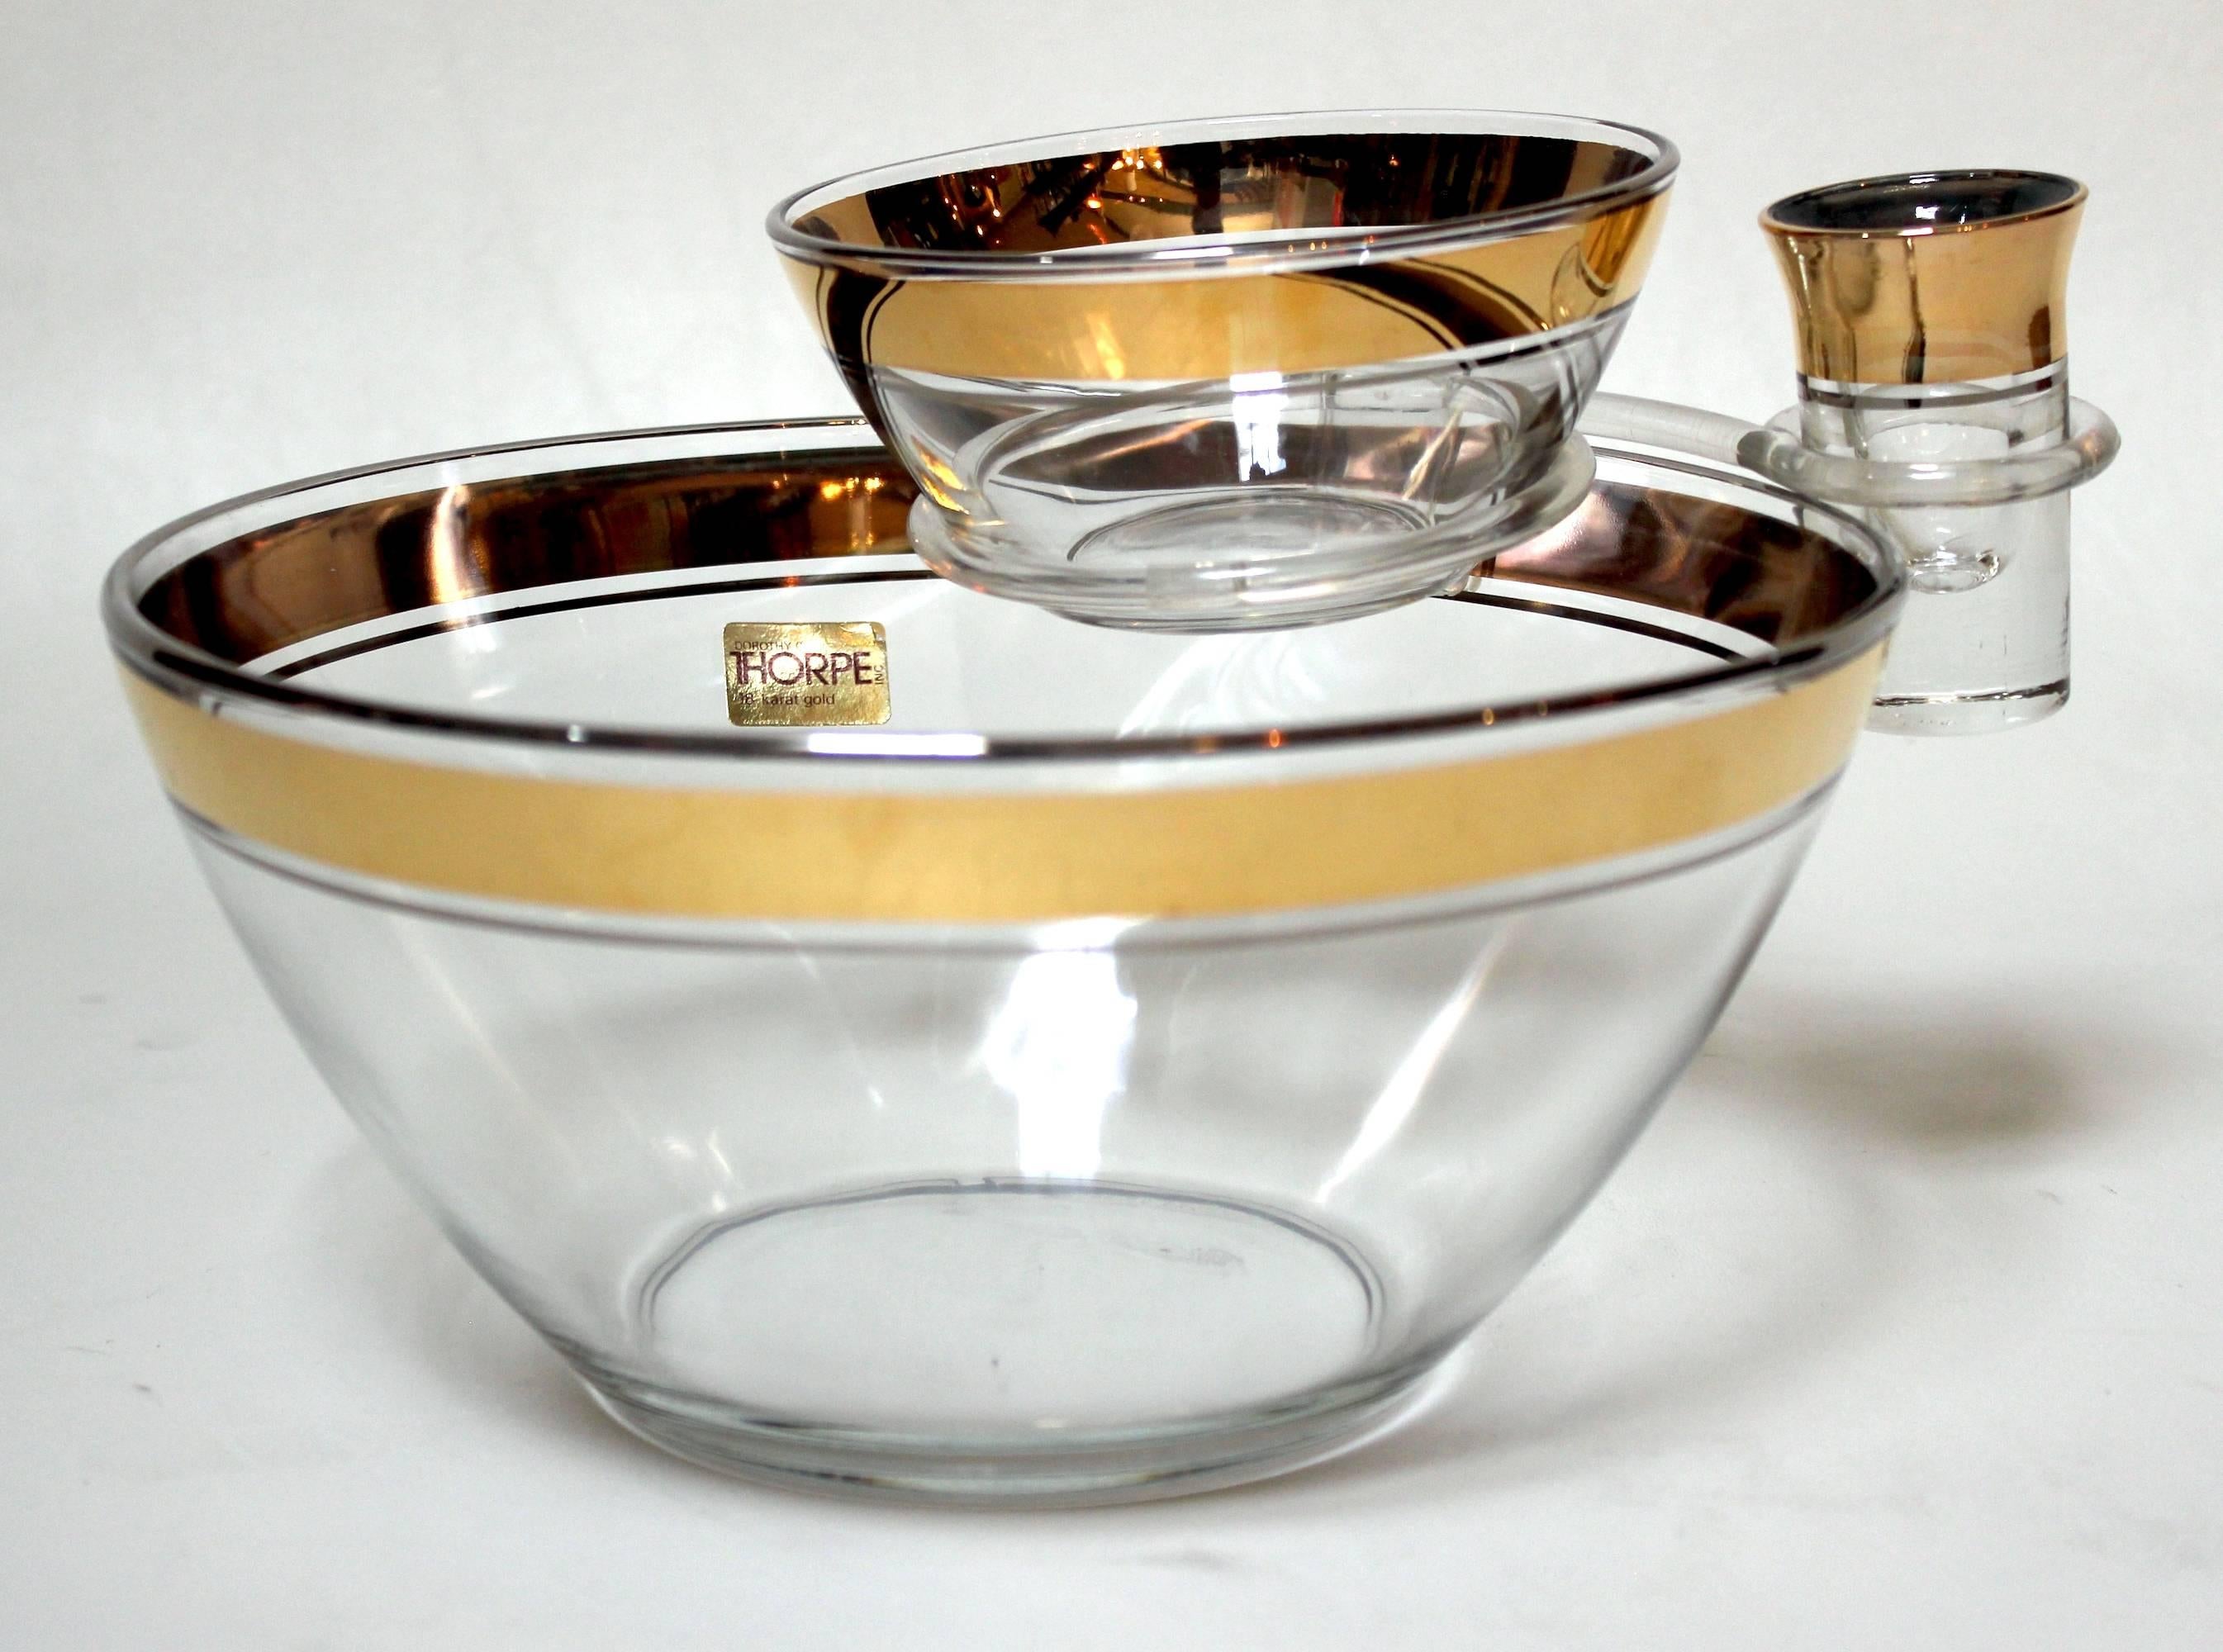 Mid-Century Modern chip and dip set by Dorothy Thorpe. The bowls are crystal with 18-karat gold edge detail. Set consists of a large bowl, a small bowl, a toothpick holder and an acrylic bowl clip. The large bowl measures 9